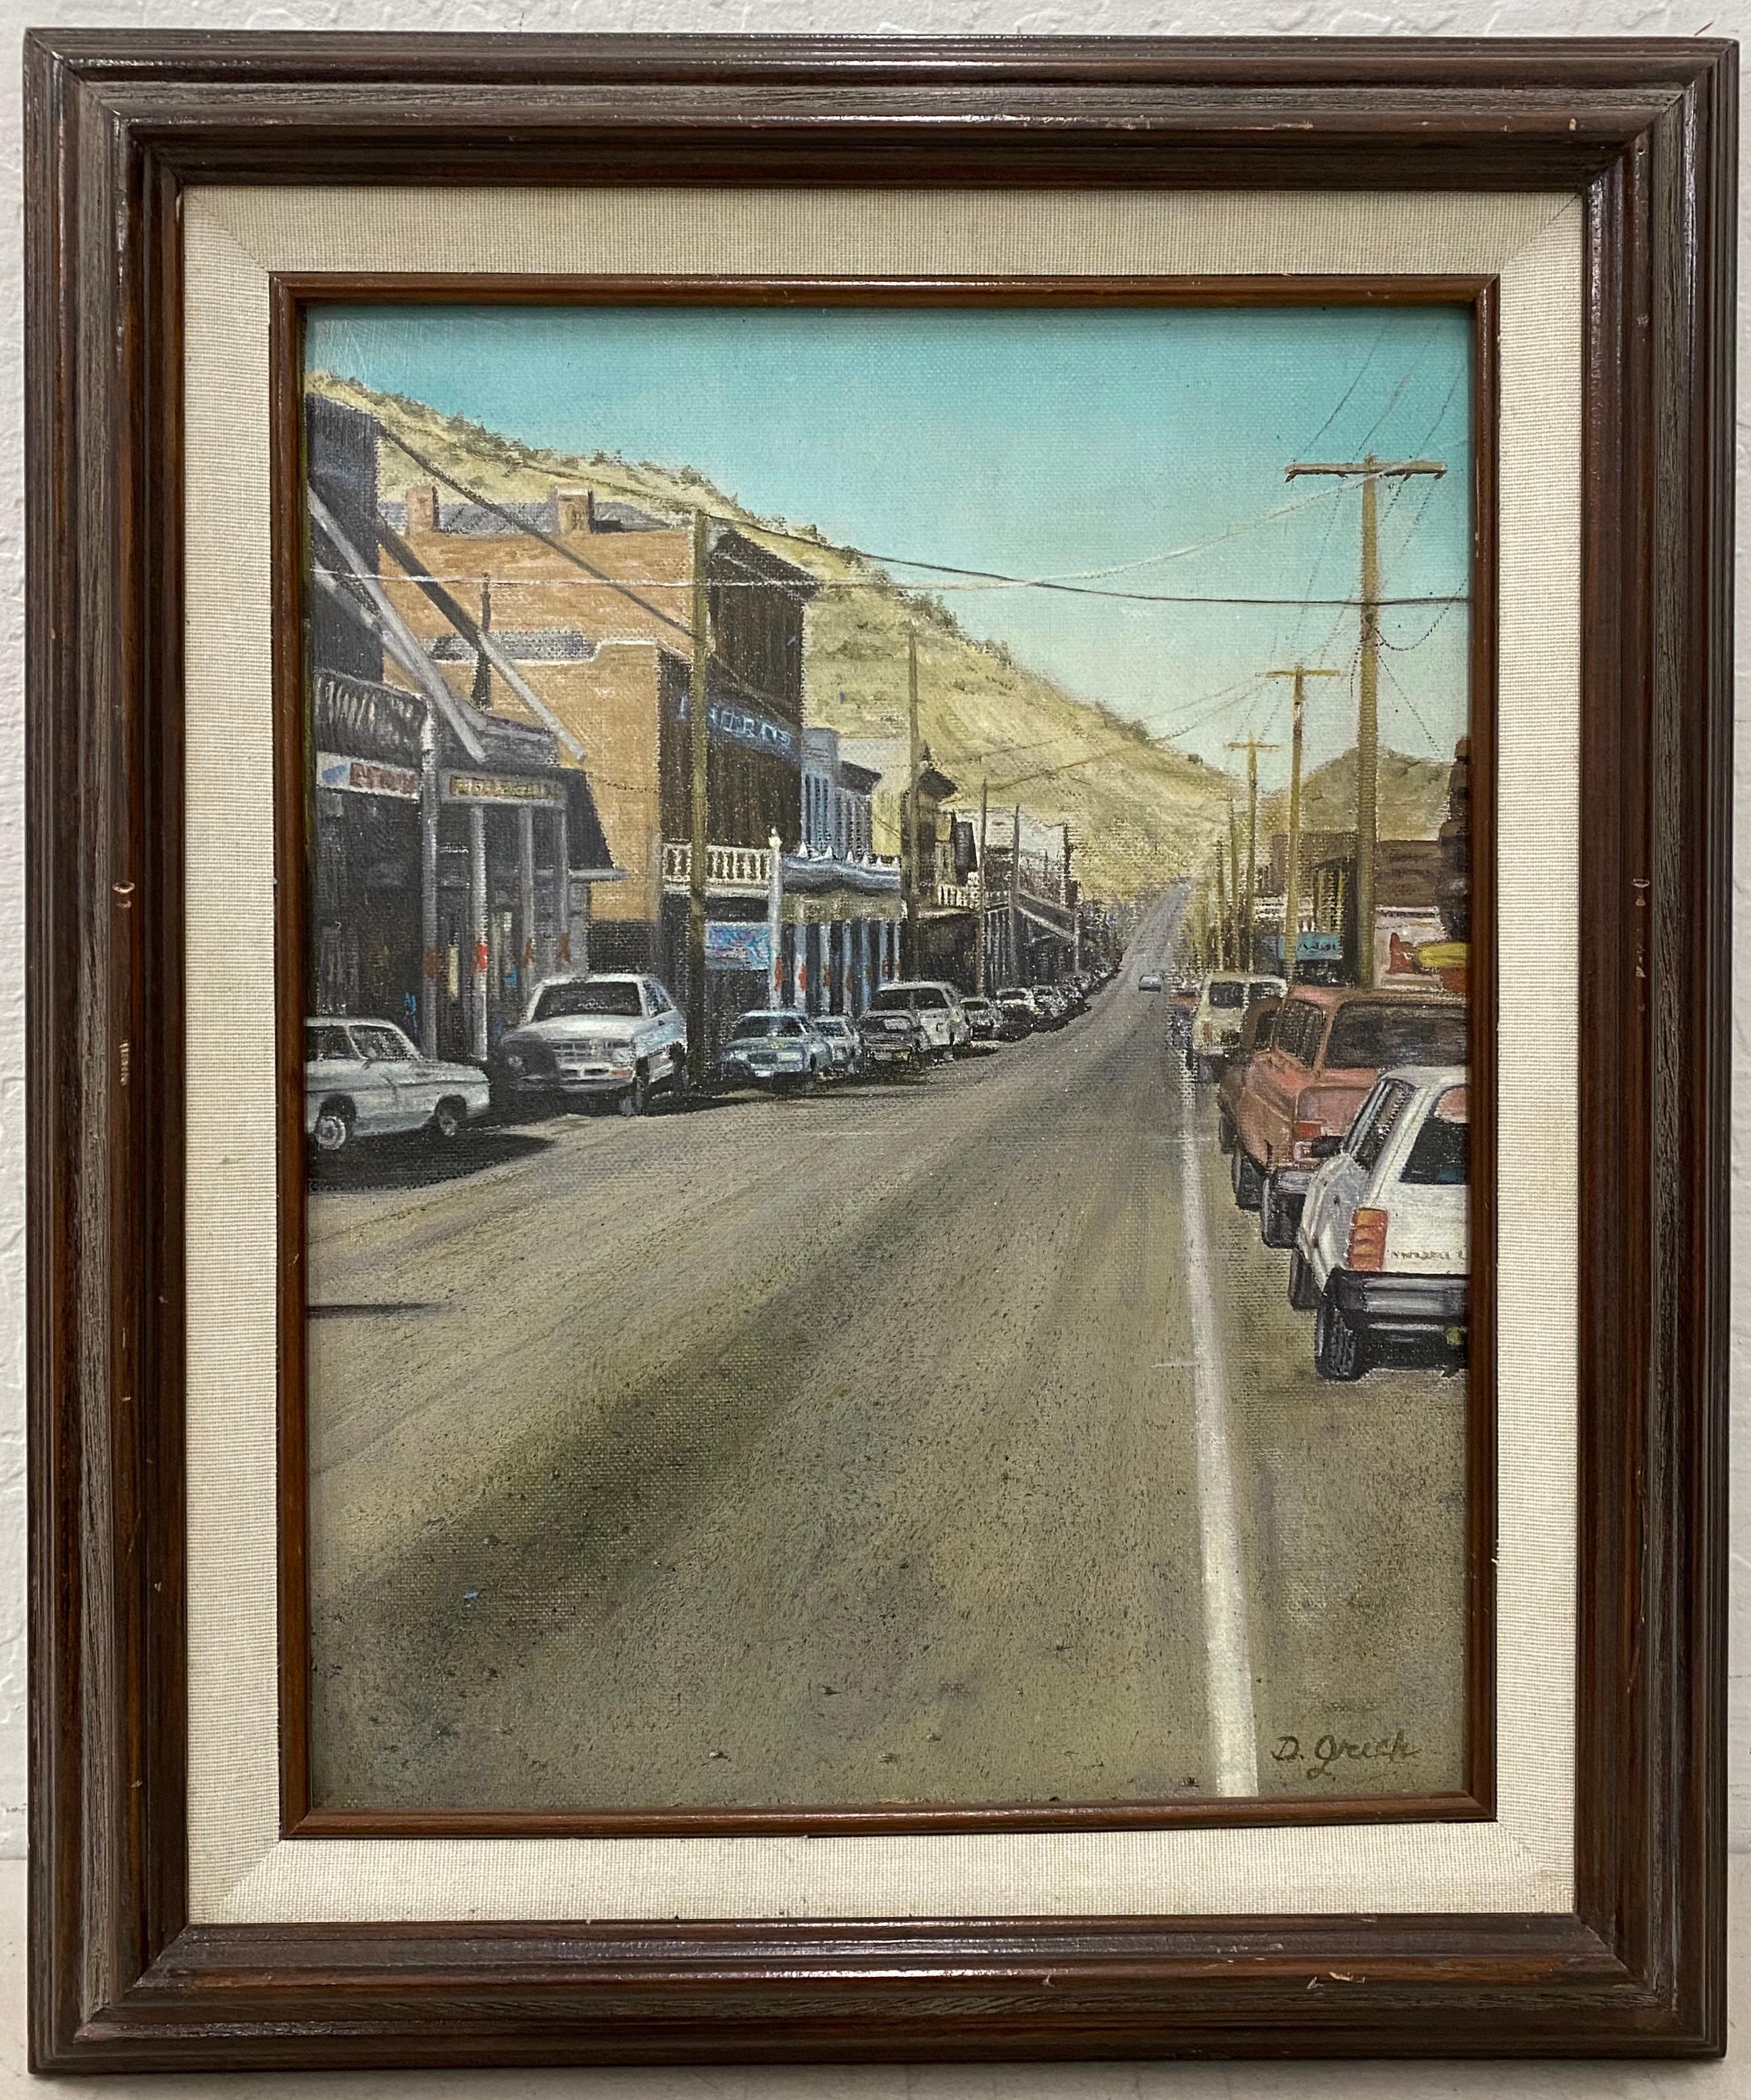 Vintage Oil Painting California Sierra Foothills Town by D. Grech c.1997